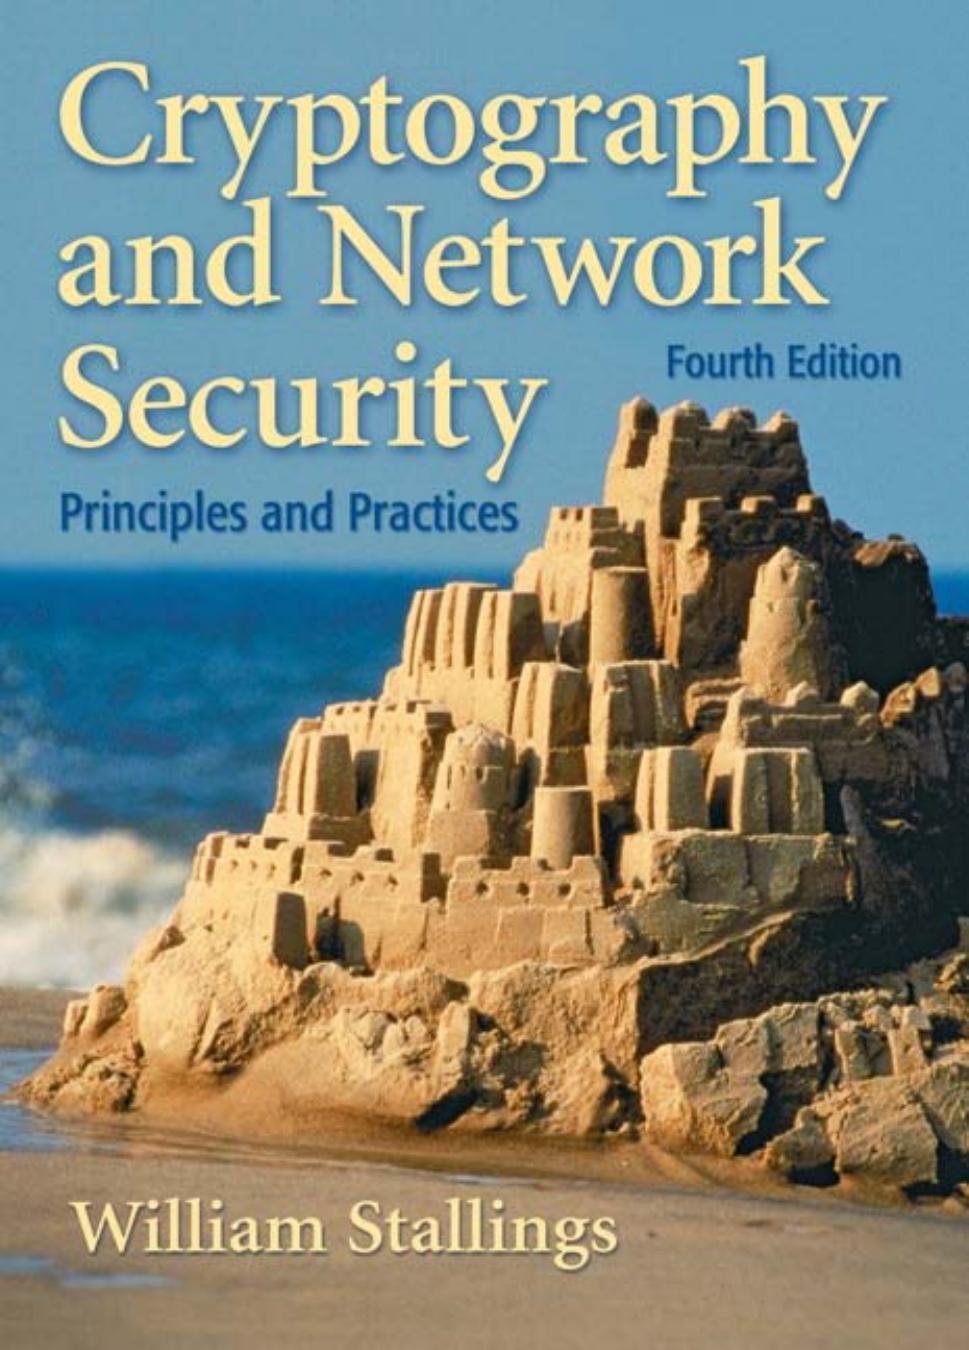 Cryptography and Network Security (4th Edition)